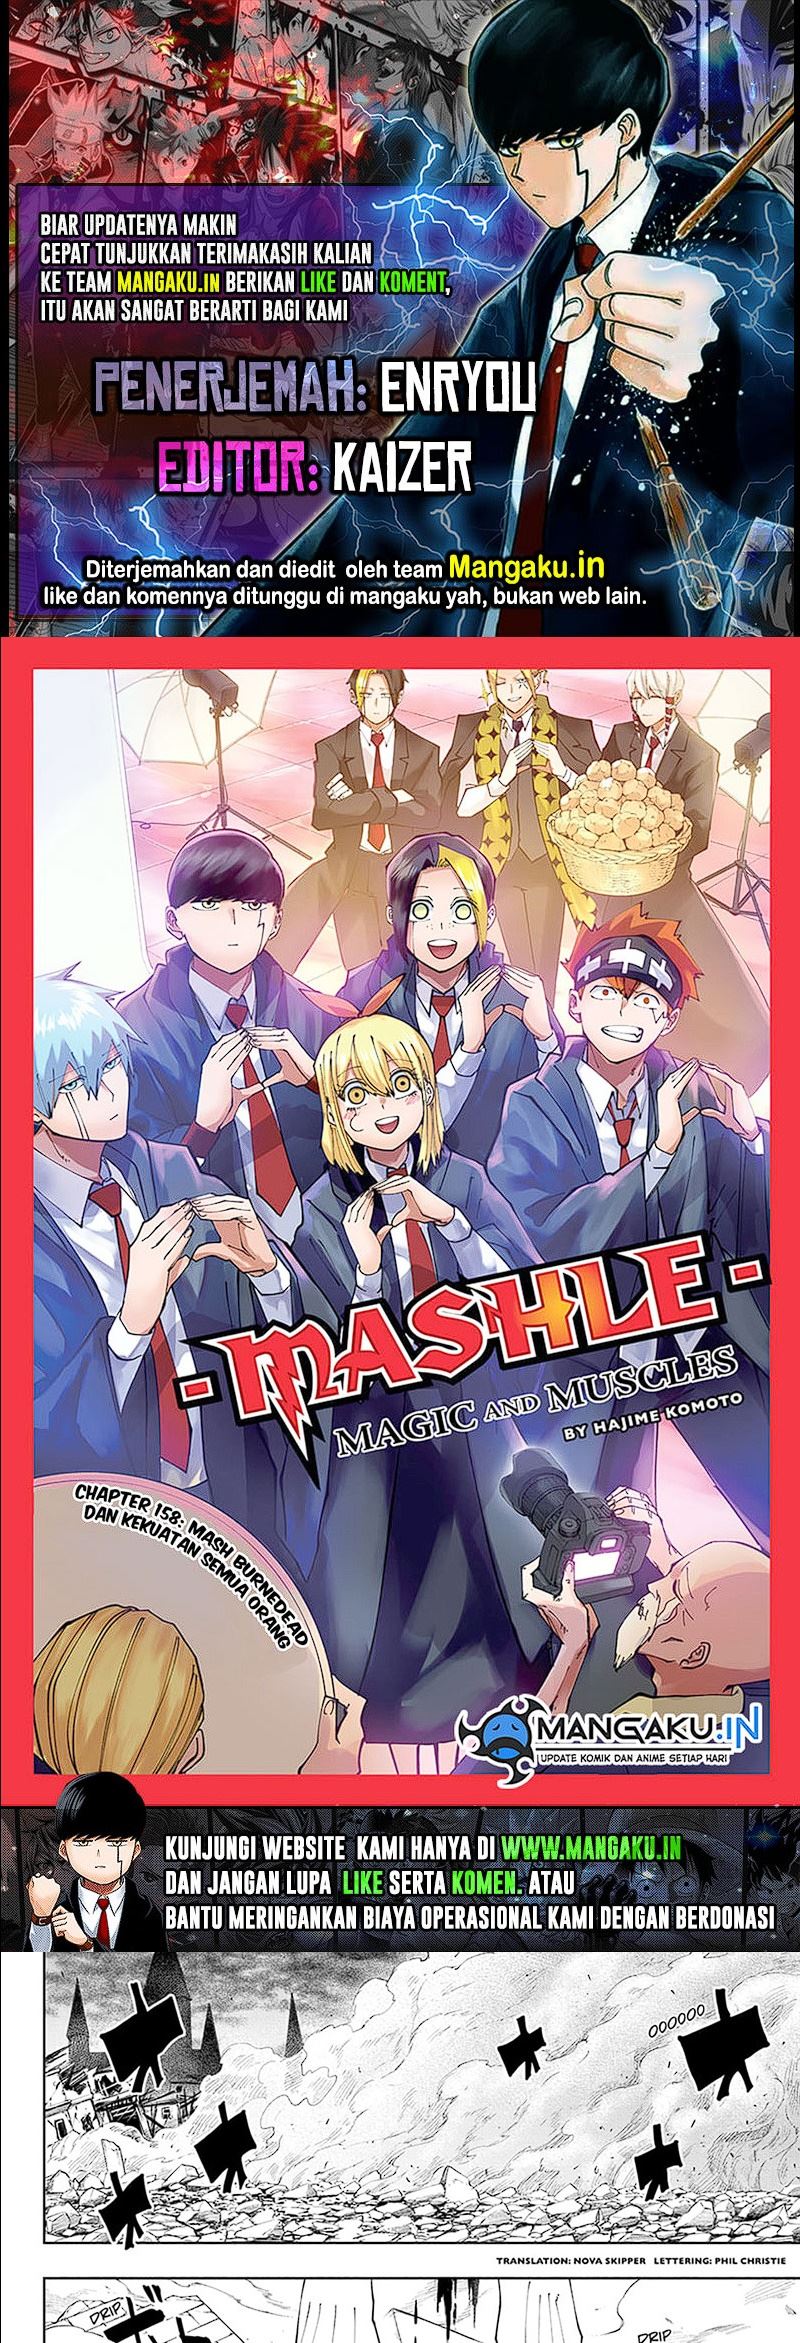 Mashle: Magic and Muscles Chapter 158